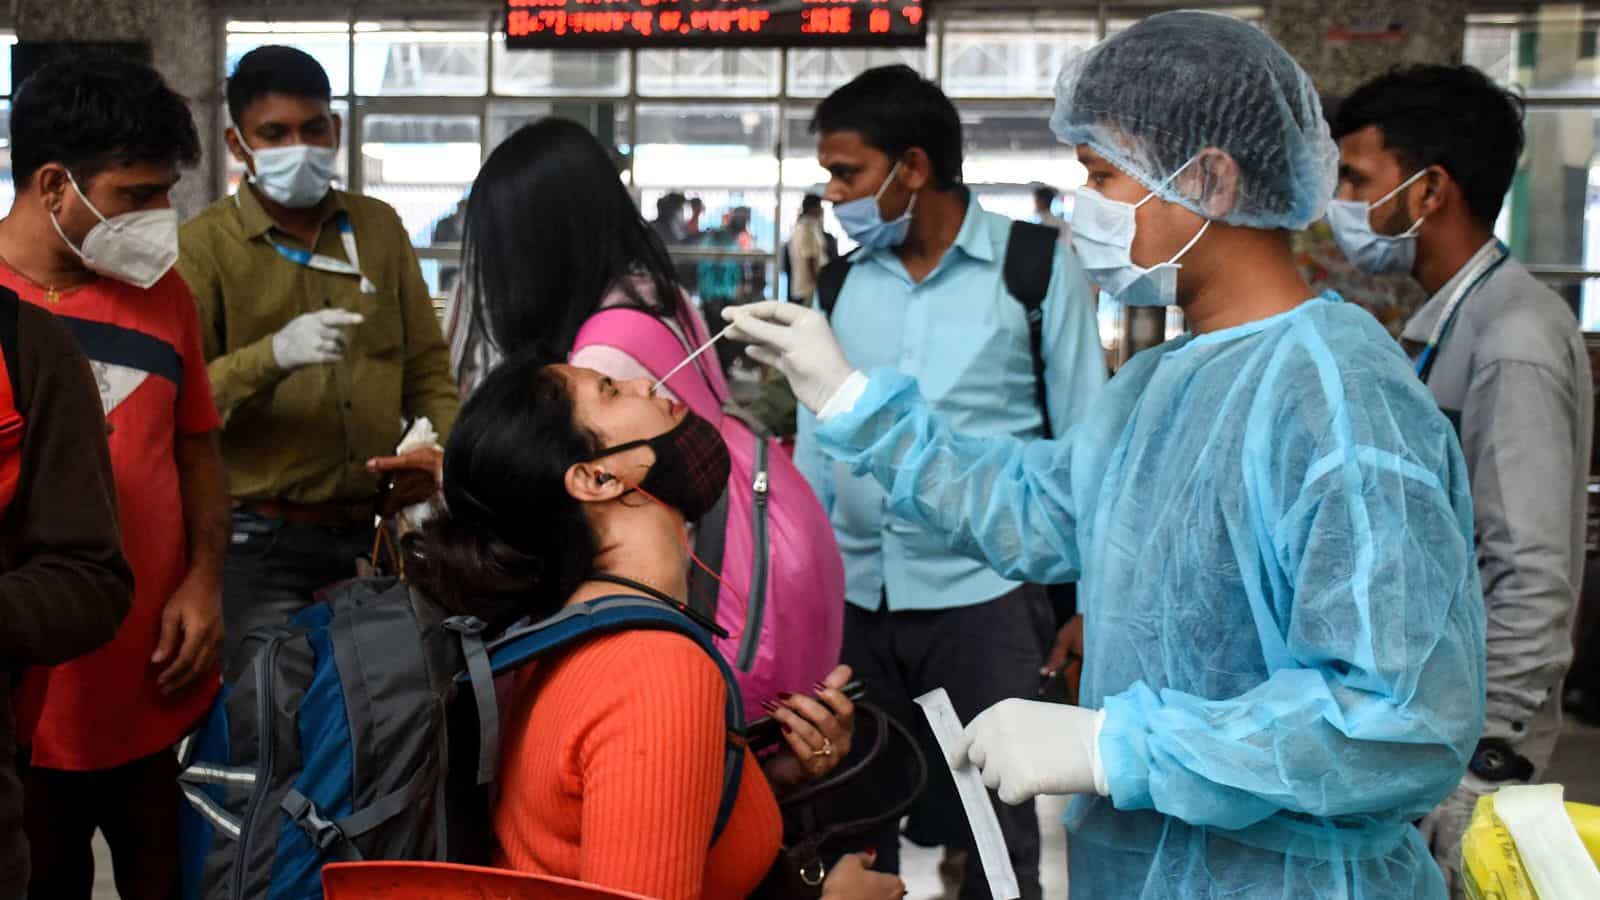 COVID in India: Corona infection increased in 19 states, 3 patients in Raipur, center issued advisory